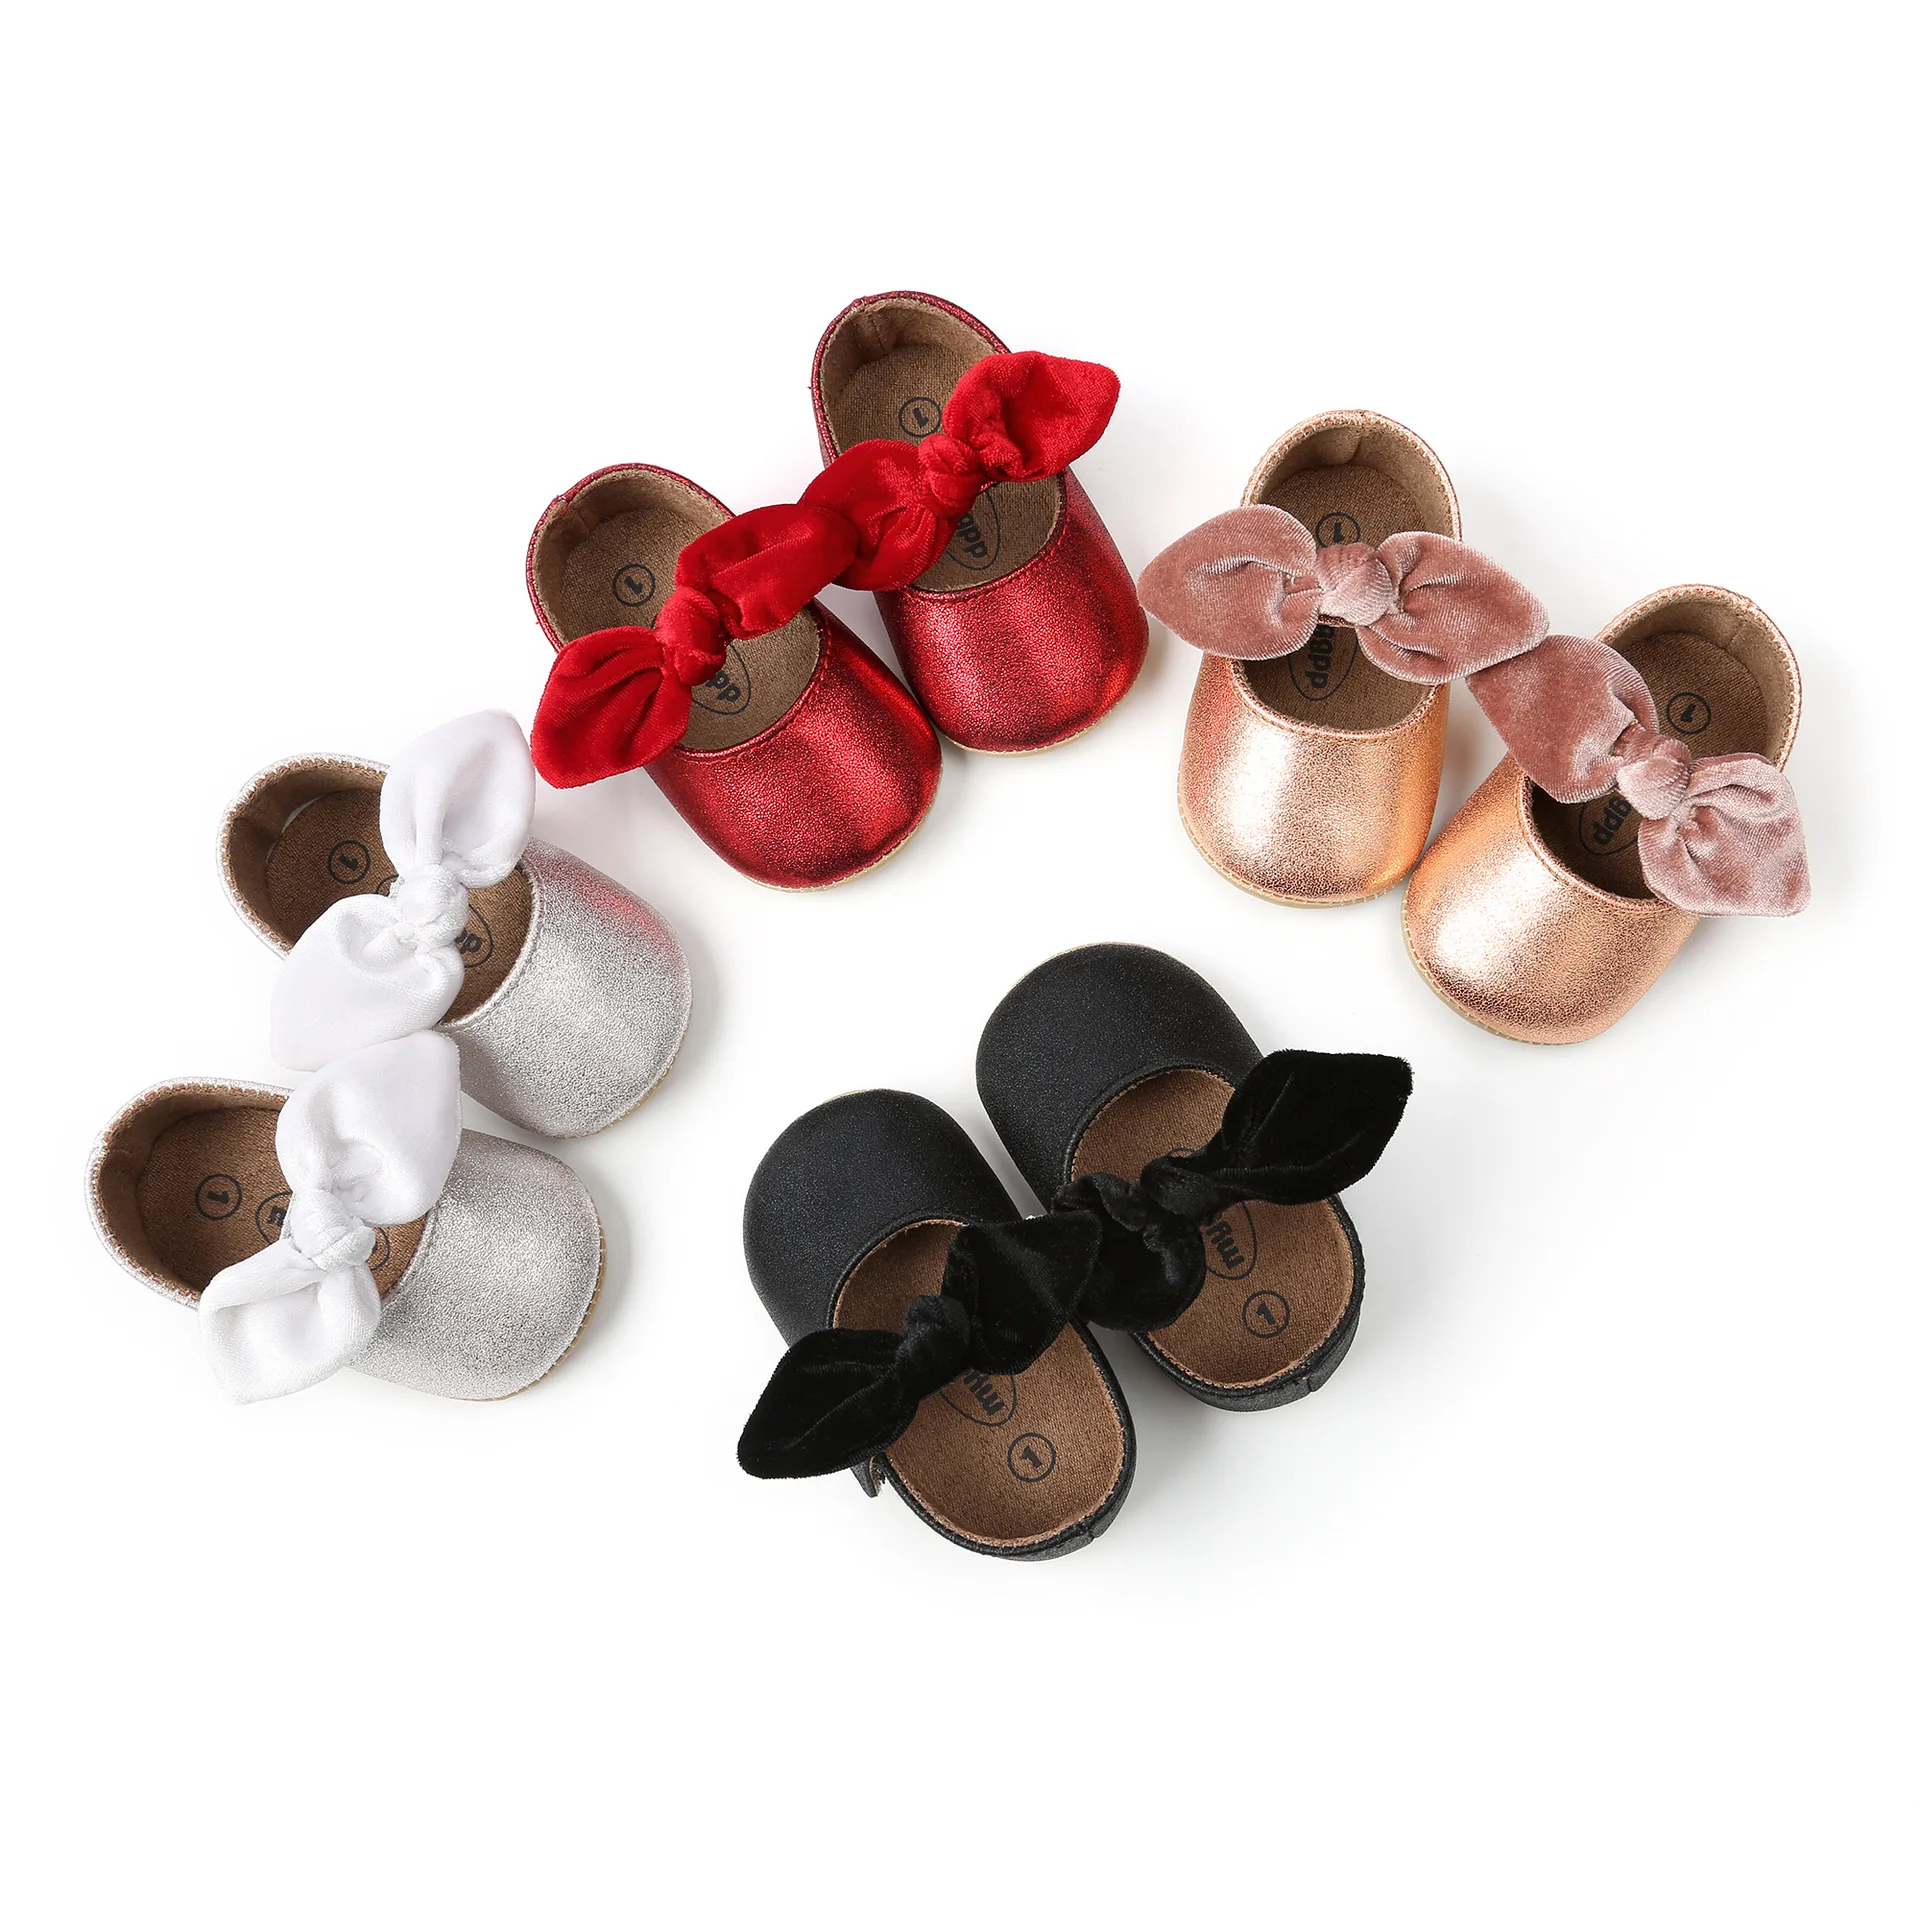 

6241 Newborn Infant Shoes Baby Girl Shoes Bowknot Rubber Sole Anti-slip PU Princess ShoesToddler First Walker Crib Shoes